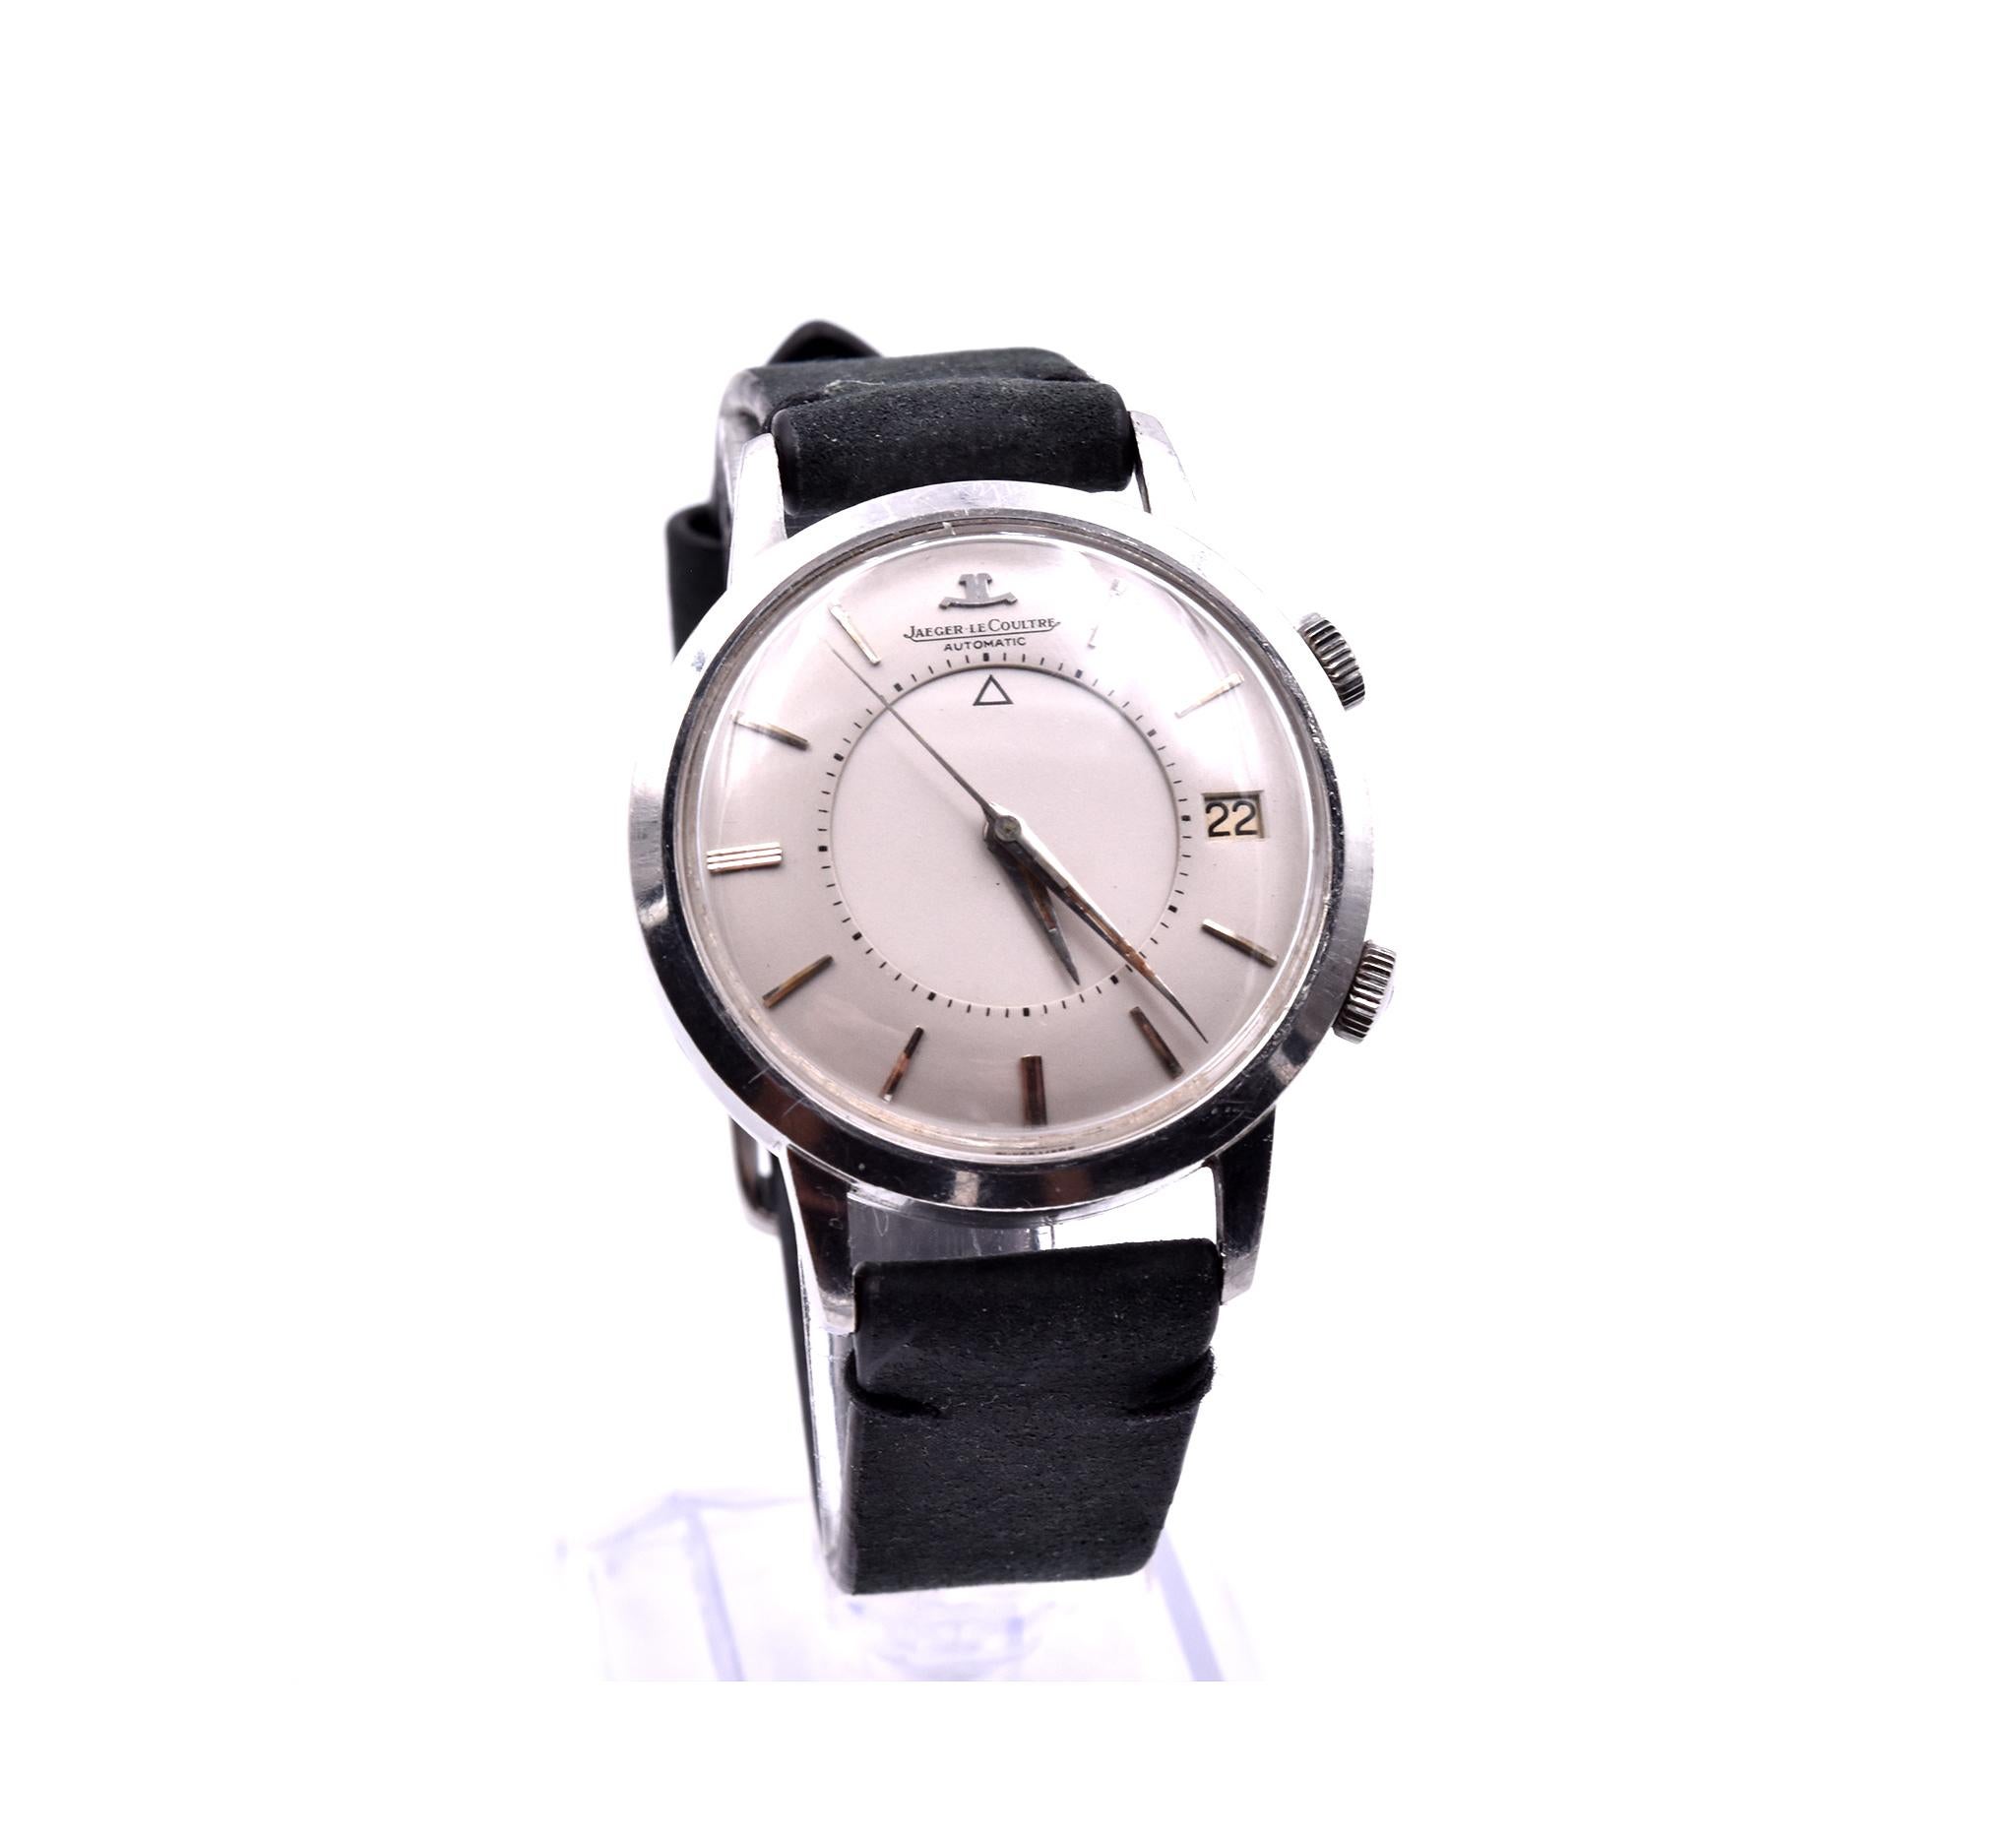 Movement: automatic
Function: hours, minutes, seconds, date, alarm
Case: 36mm stainless case, plastic protective crystal, pull/push crown
Dial: silver dial with silver hands and hour markers
Bracelet: black nubuck genuine leather strap with steel